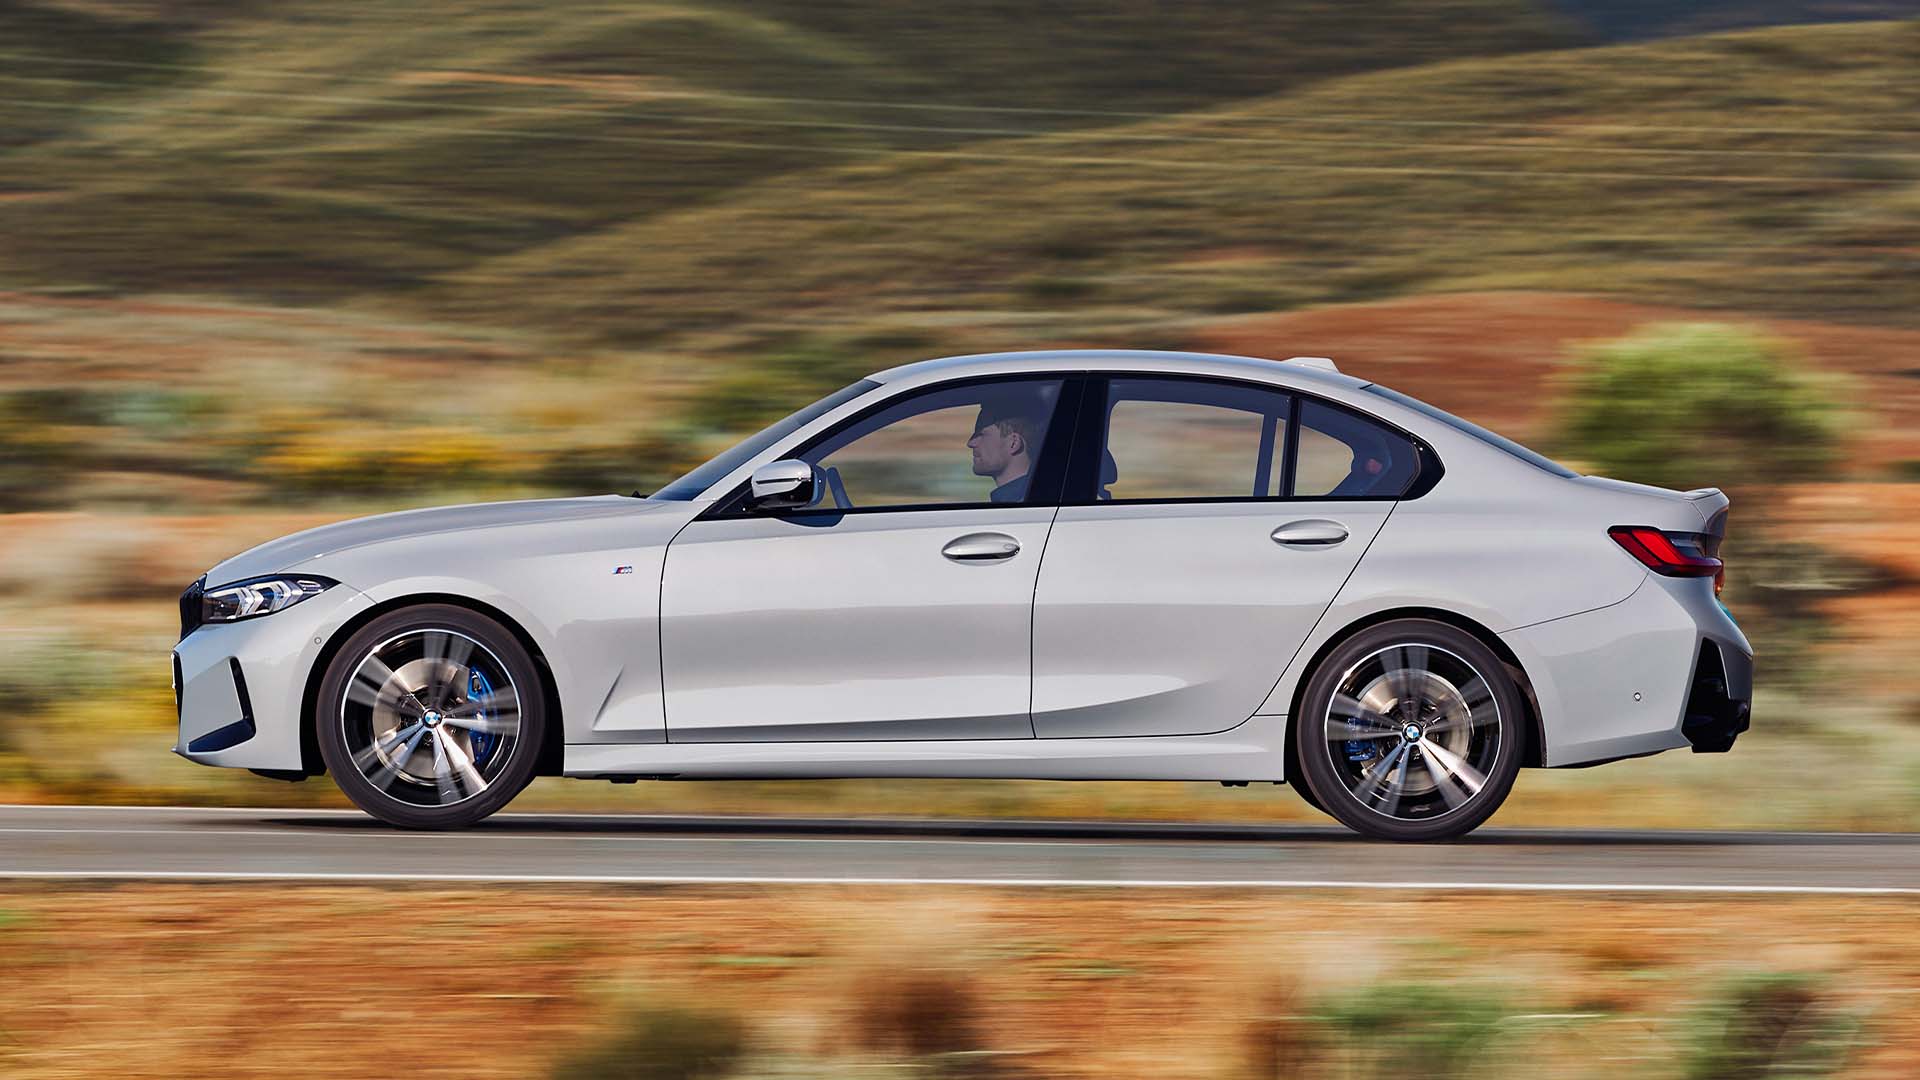 BMW Quietly Launches In-Car Subscriptions in U.S. - Kelley Blue Book